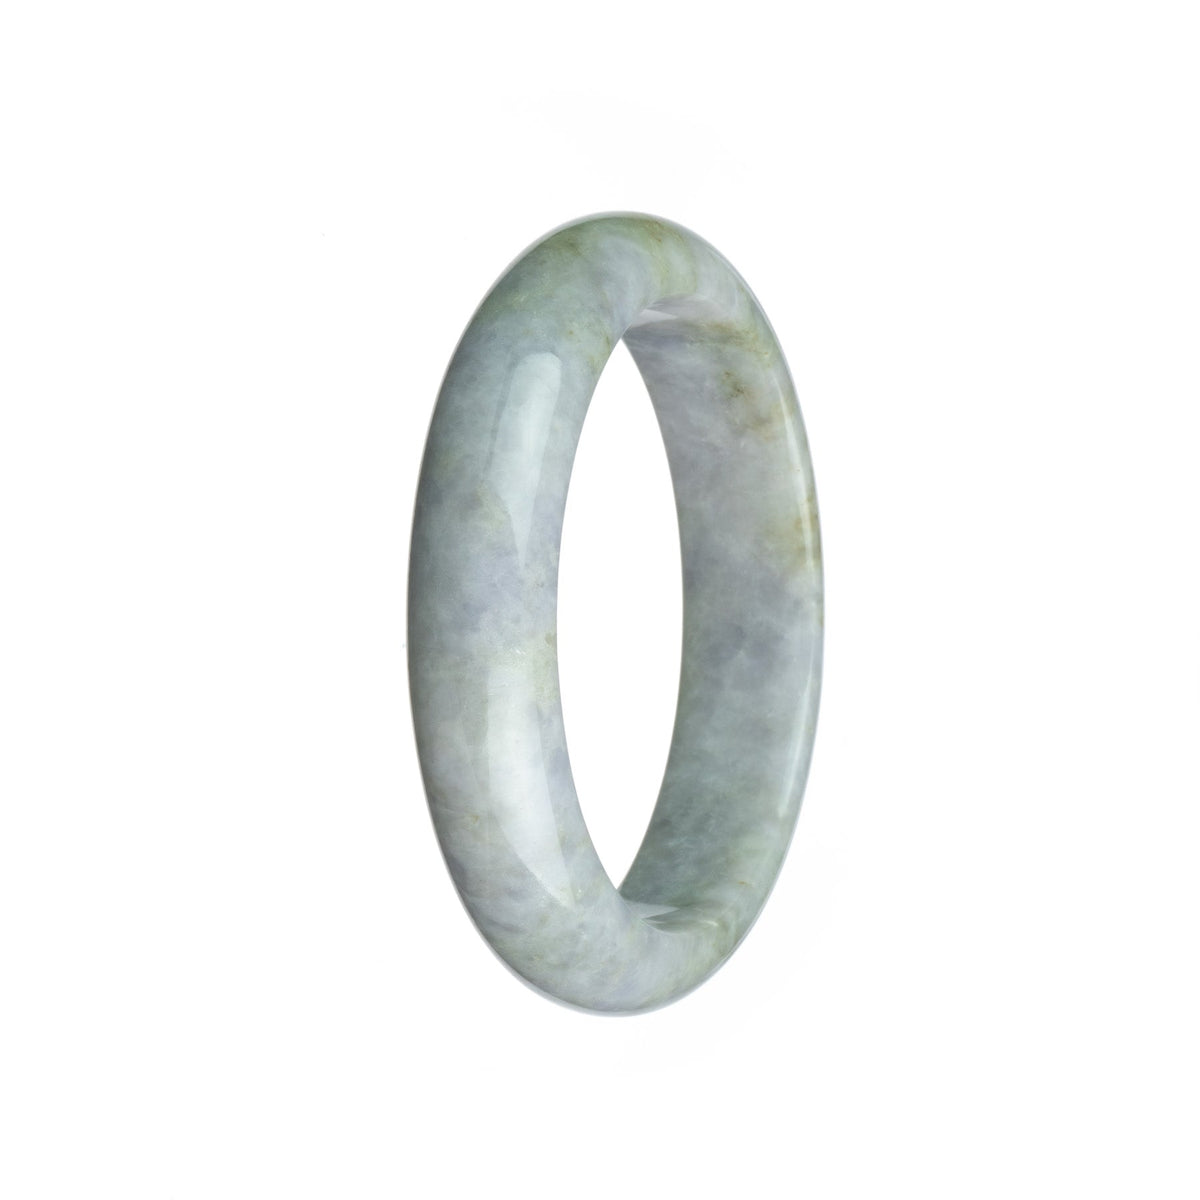 A close-up photo of a lavender Burma jade bangle bracelet with a half moon shape. The bracelet is untreated, showcasing its natural and authentic beauty.